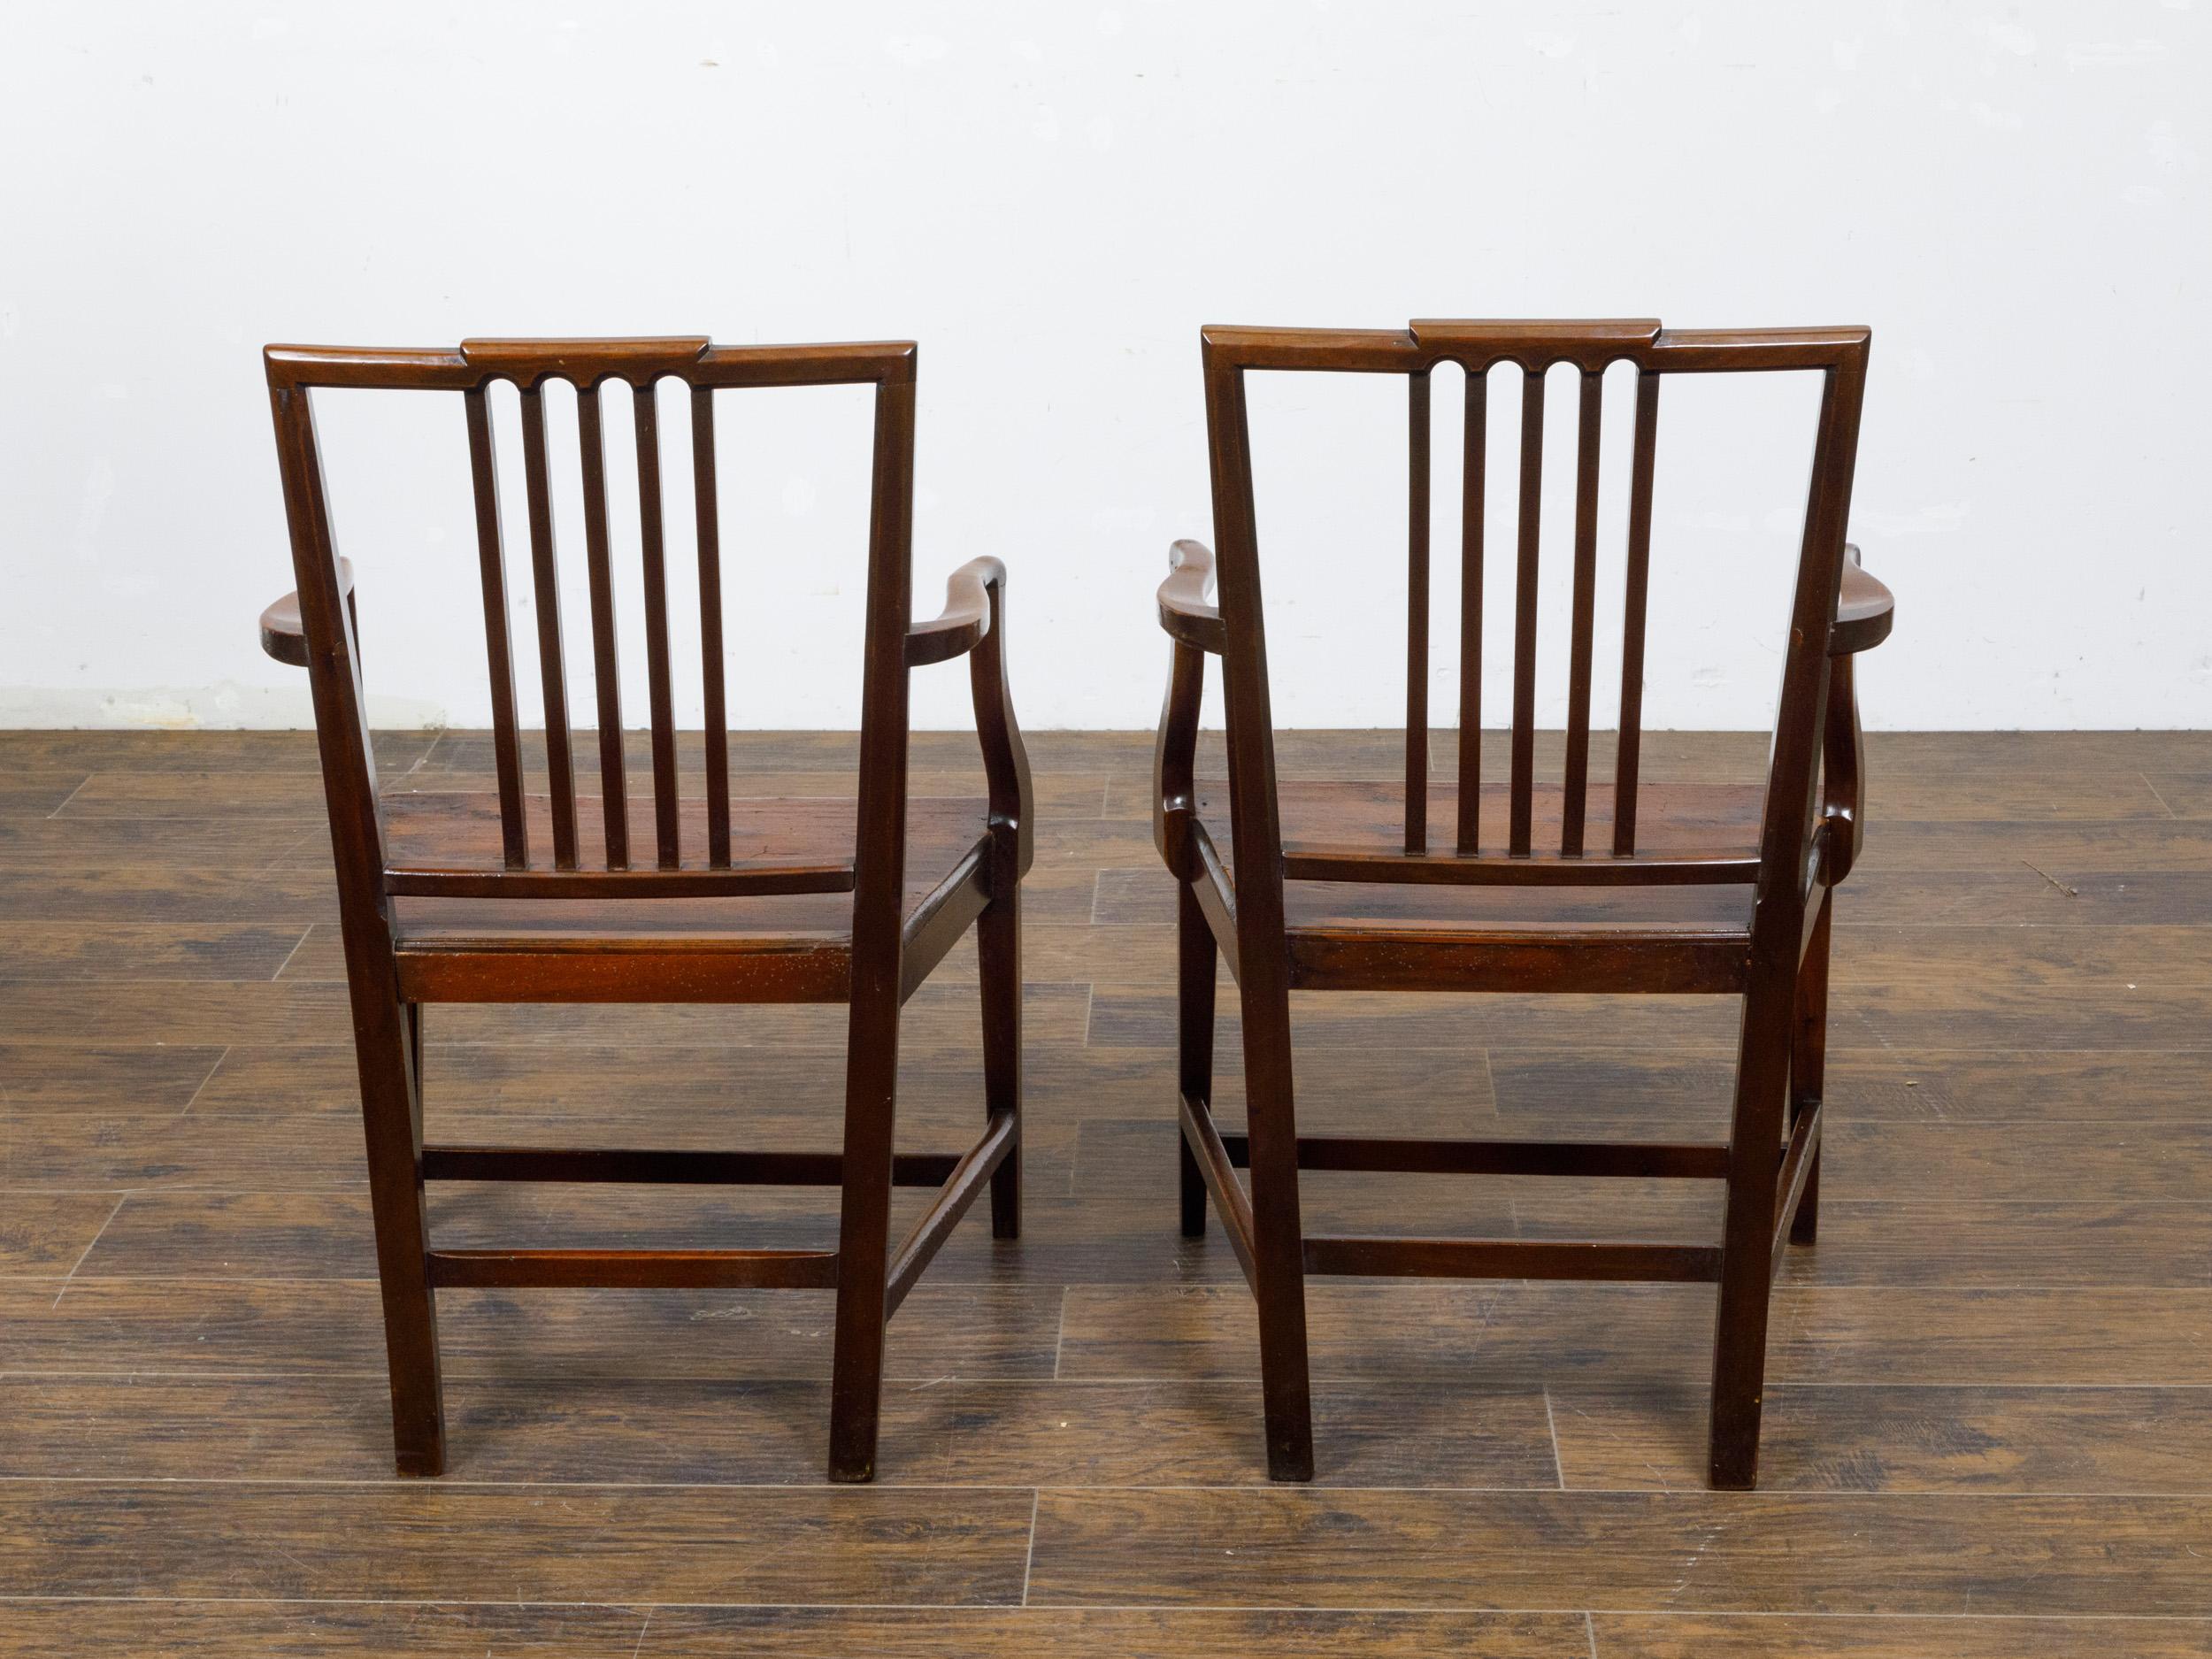 Carved Pair of English Early 19th Century Plank Seat Chairs with Scrolling Arms For Sale